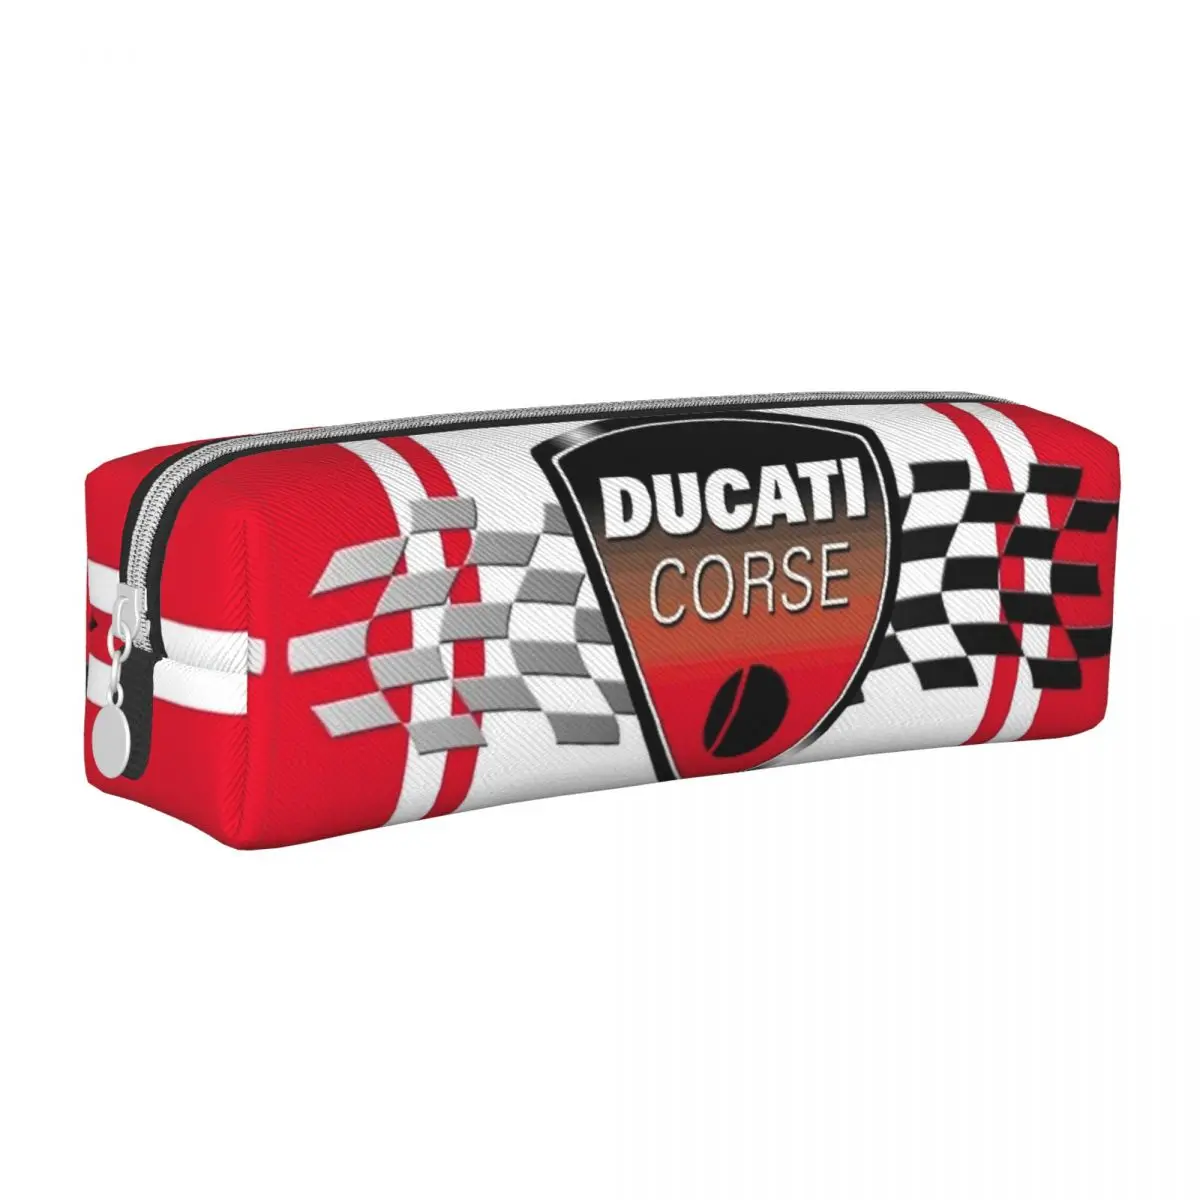 

Cute Racing Sport Ducatis Supermoto Pencil Cases Pencilcases Pen Holder for Girls Boys Bags School Supplies Zipper Stationery